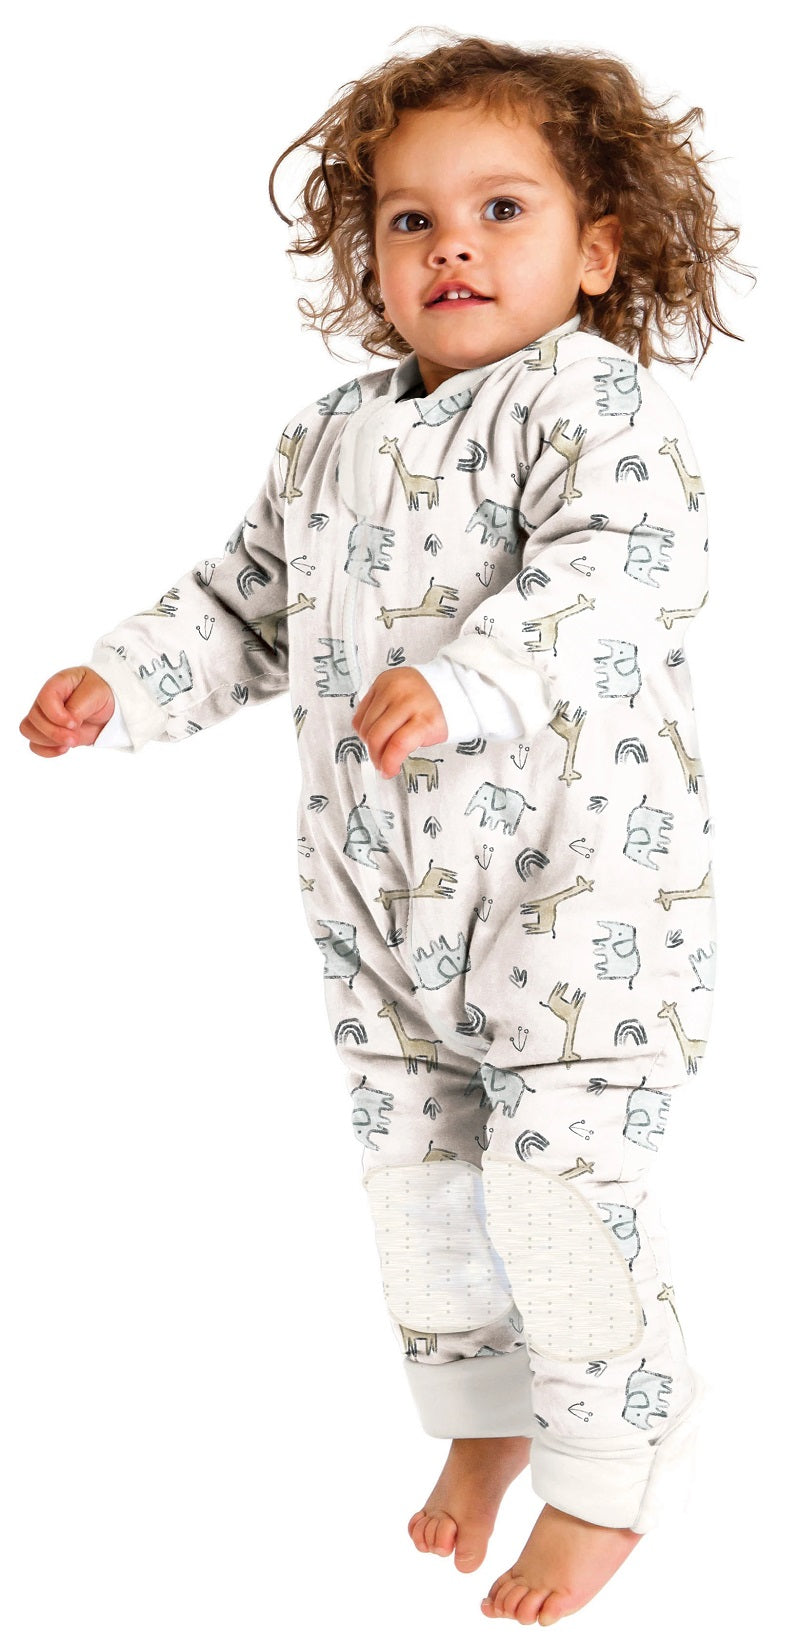 Baby Studio Cotton Warmies With Arms And Legs 3.0 TOG - Oatmeal/Rumble Jungle